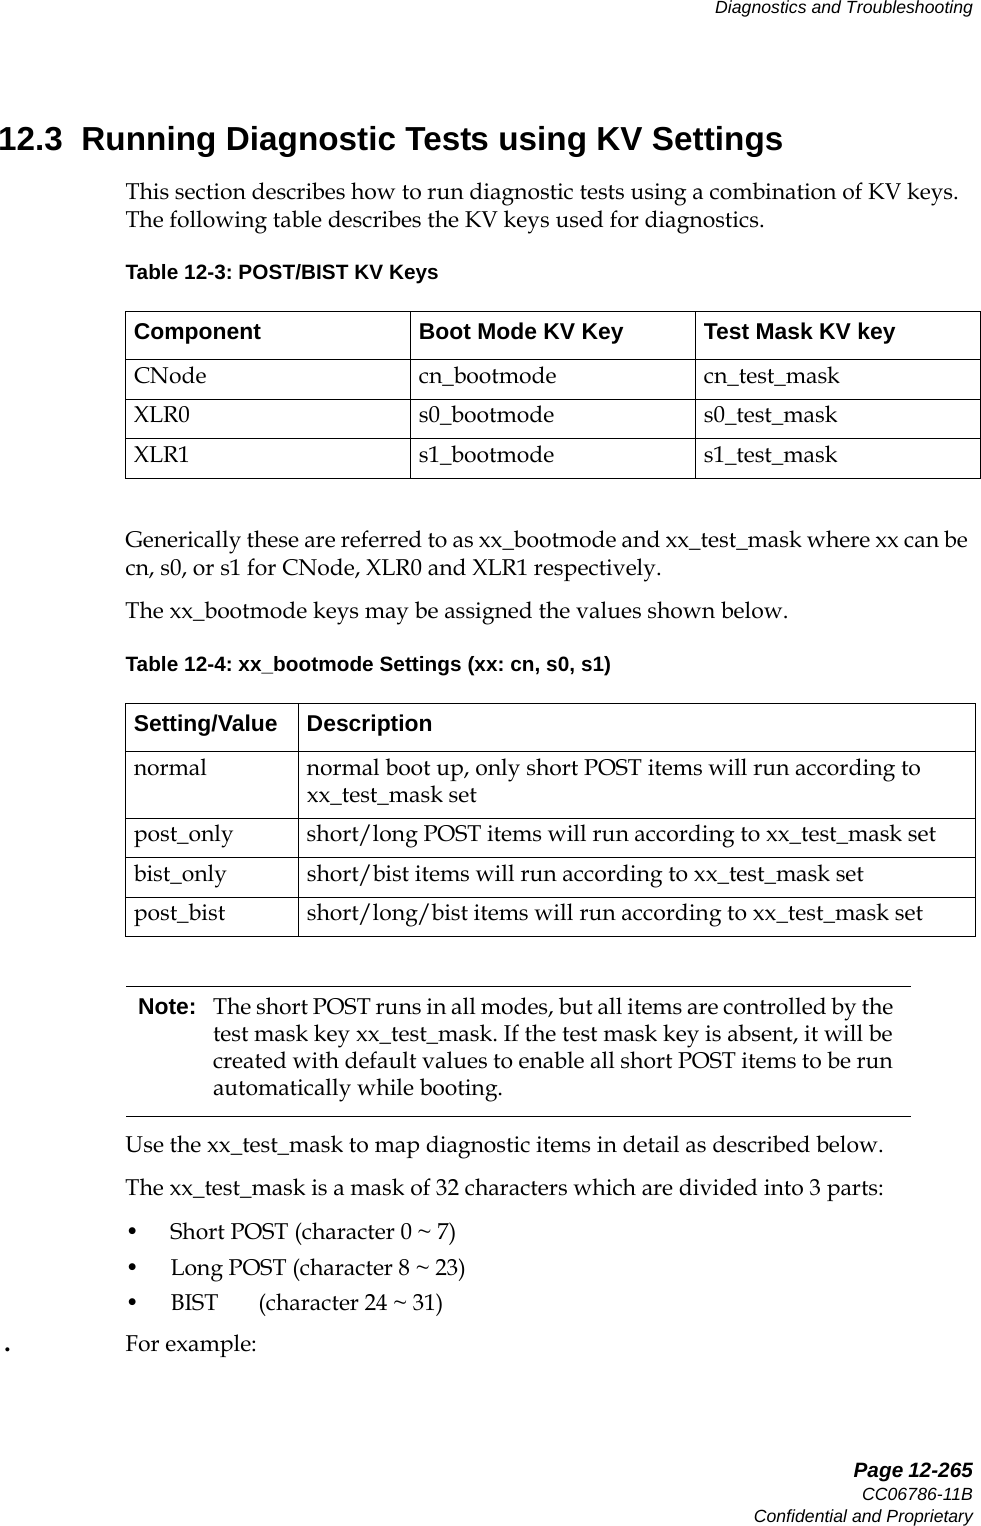   Page 12-265CC06786-11BConfidential and ProprietaryDiagnostics and Troubleshooting14ABABPreliminary12.3  Running Diagnostic Tests using KV SettingsThis section describes how to run diagnostic tests using a combination of KV keys. The following table describes the KV keys used for diagnostics.Generically these are referred to as xx_bootmode and xx_test_mask where xx can be cn, s0, or s1 for CNode, XLR0 and XLR1 respectively. The xx_bootmode keys may be assigned the values shown below.Use the xx_test_mask to map diagnostic items in detail as described below.The xx_test_mask is a mask of 32 characters which are divided into 3 parts: • Short POST (character 0 ~ 7)• Long POST (character 8 ~ 23)• BIST       (character 24 ~ 31) .  For example: Table 12-3: POST/BIST KV KeysComponent Boot Mode KV Key Test Mask KV keyCNode cn_bootmode cn_test_maskXLR0 s0_bootmode s0_test_maskXLR1 s1_bootmode s1_test_maskTable 12-4: xx_bootmode Settings (xx: cn, s0, s1)Setting/Value Descriptionnormal normal boot up, only short POST items will run according to xx_test_mask setpost_only short/long POST items will run according to xx_test_mask setbist_only short/bist items will run according to xx_test_mask setpost_bist short/long/bist items will run according to xx_test_mask setNote: The short POST runs in all modes, but all items are controlled by the test mask key xx_test_mask. If the test mask key is absent, it will be created with default values to enable all short POST items to be run automatically while booting. 